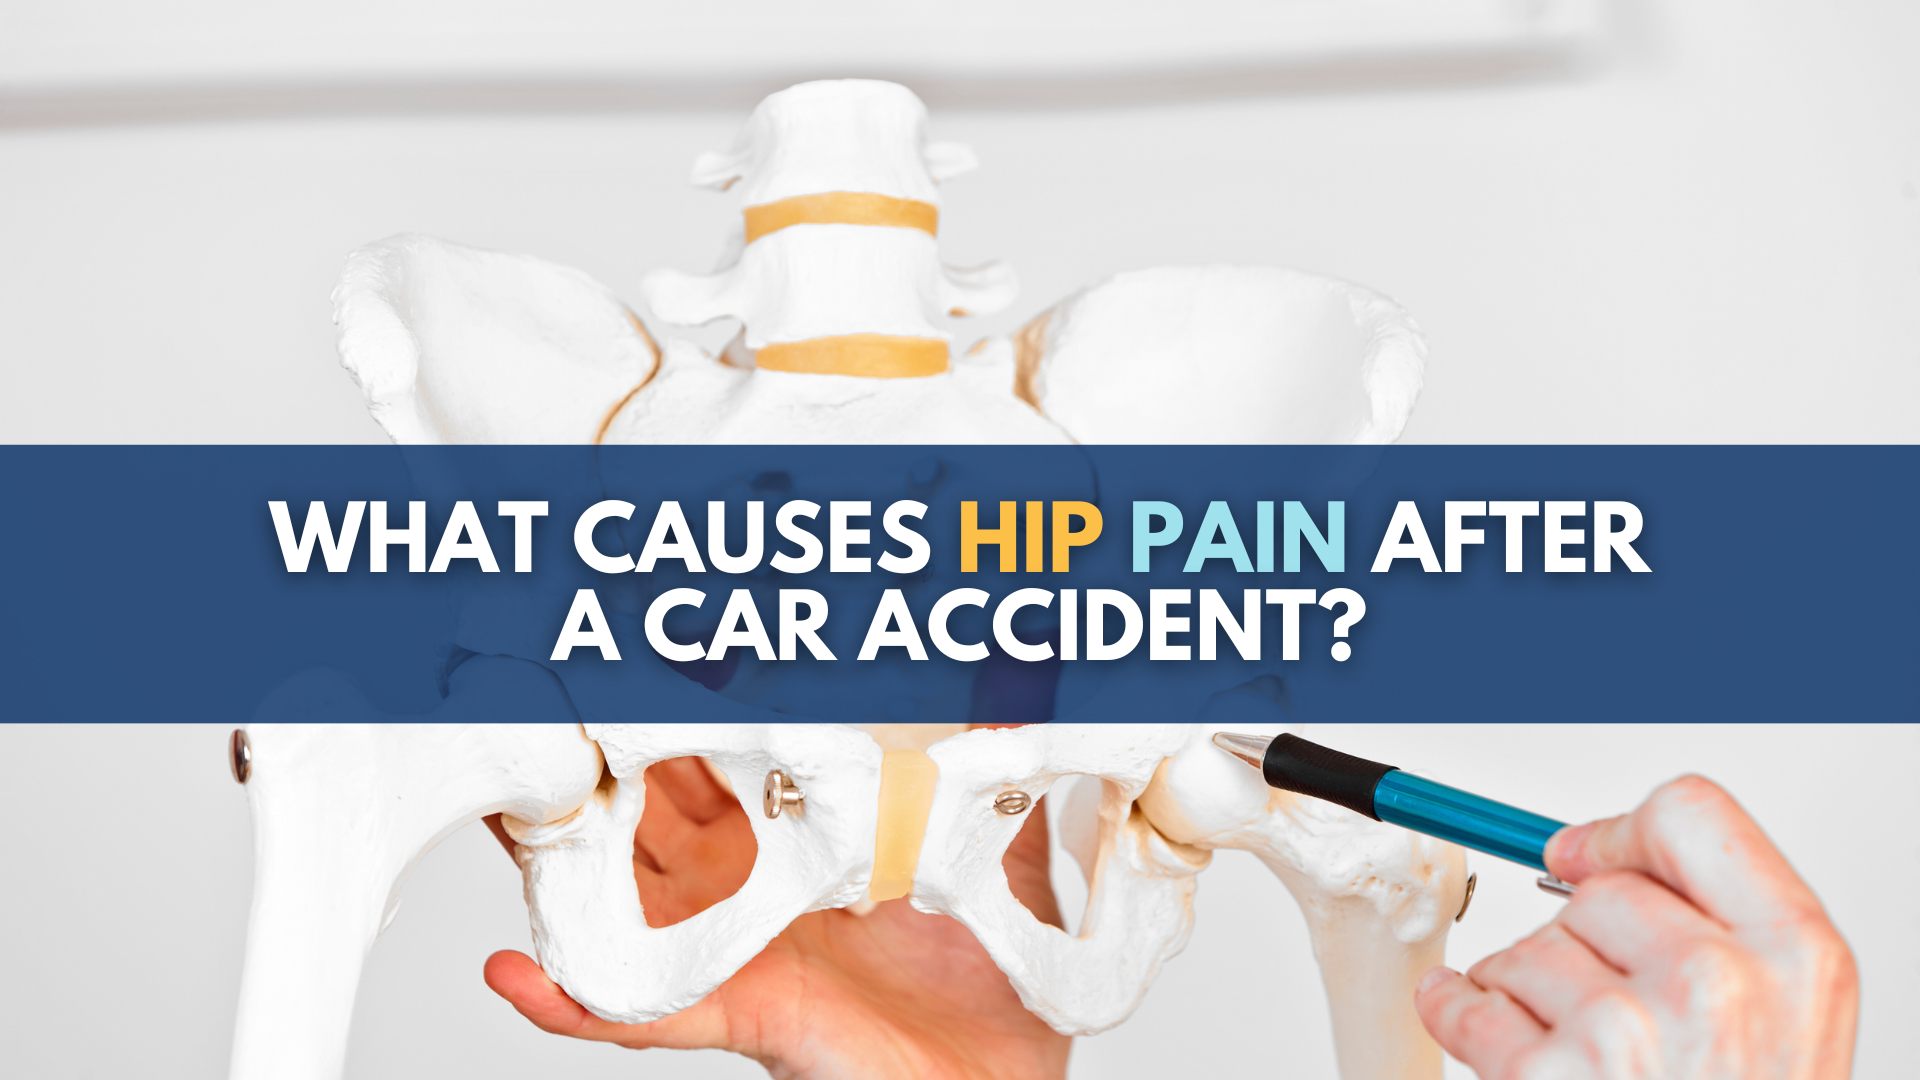 What causes hip pain after a car accident?